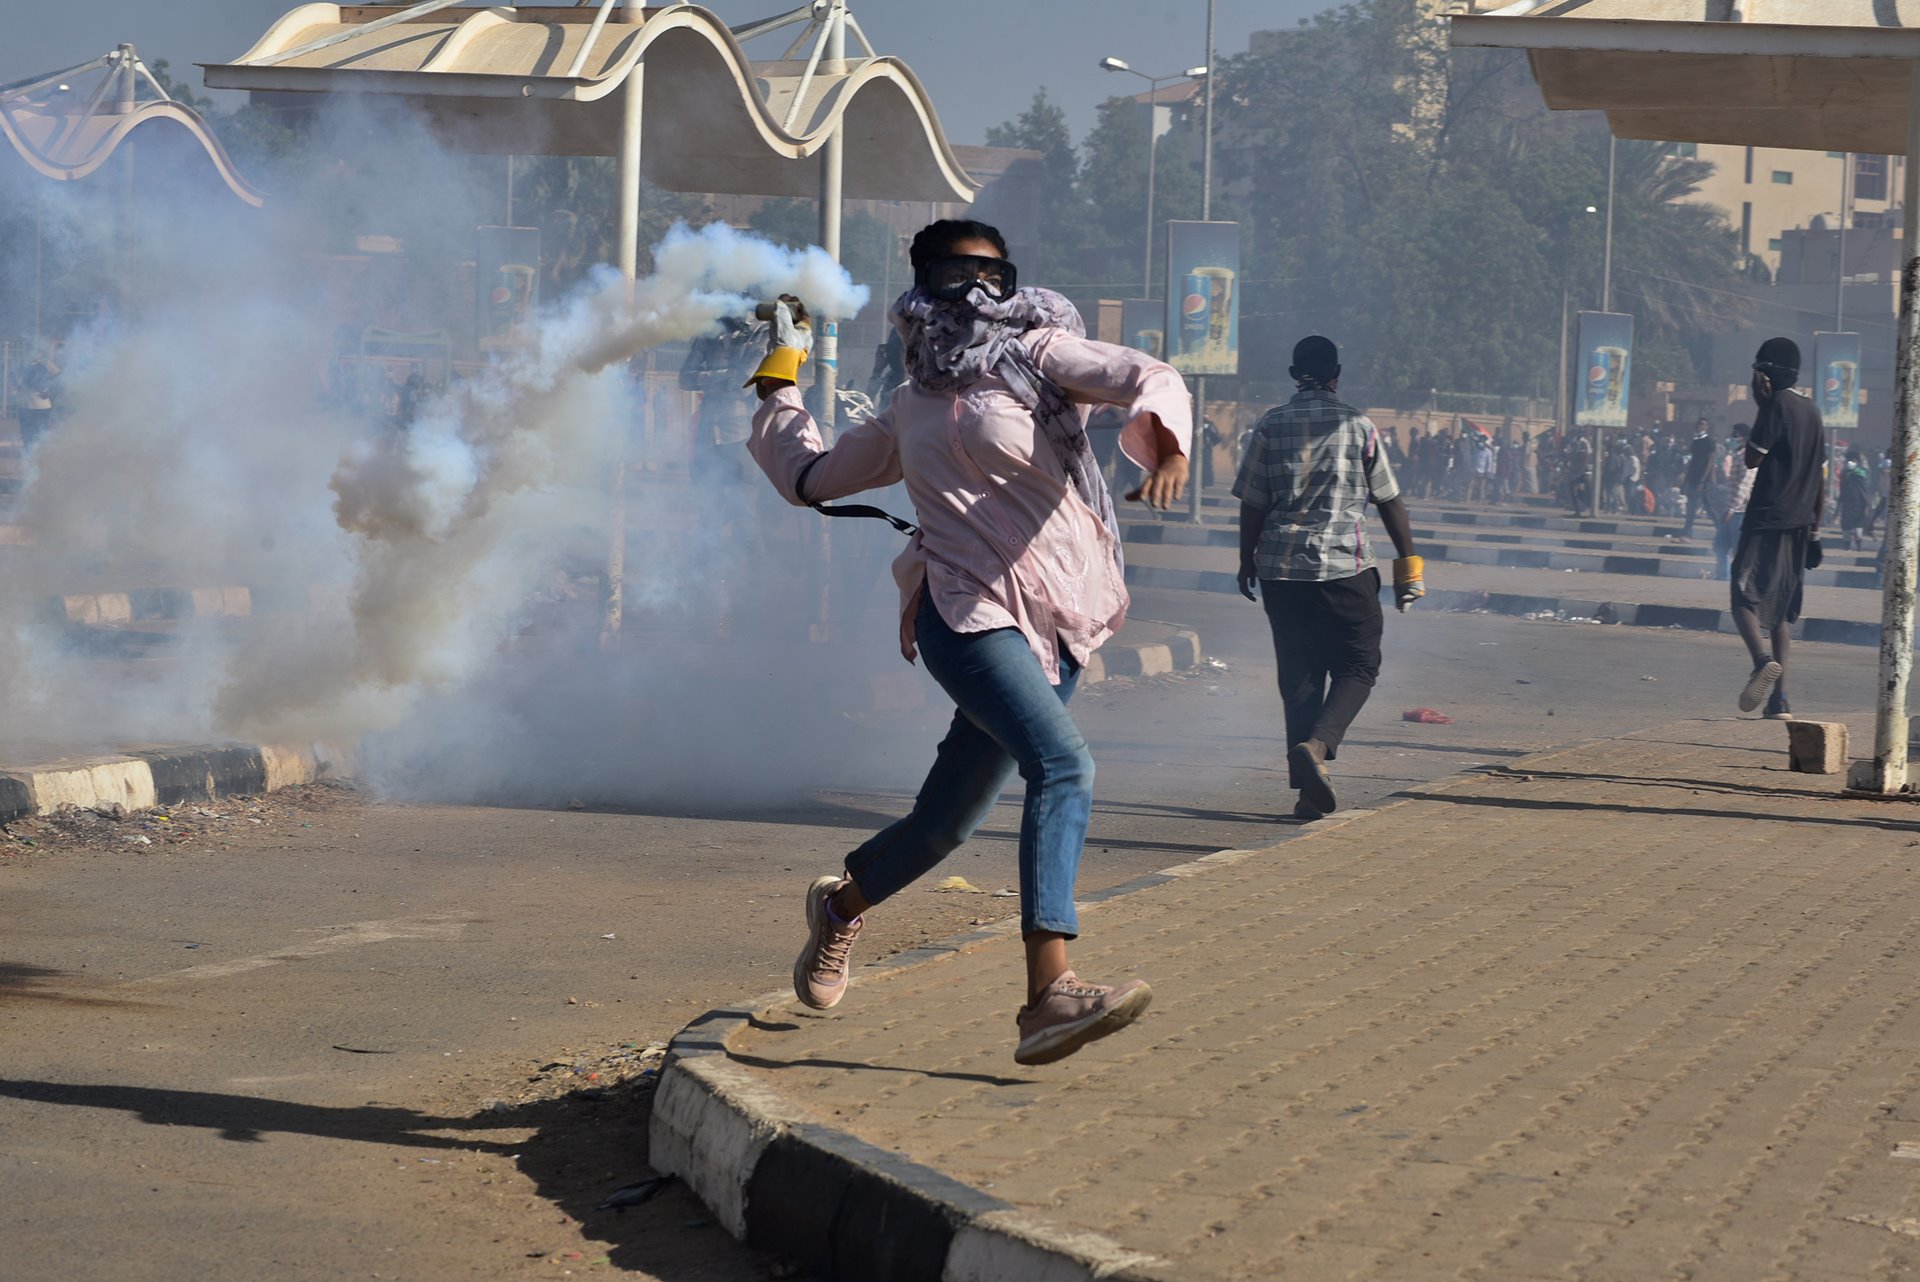 <p>A protester throws back a tear-gas canister that had been fired by security forces, during a march demanding an end to military rule, in Khartoum, Sudan.</p>
